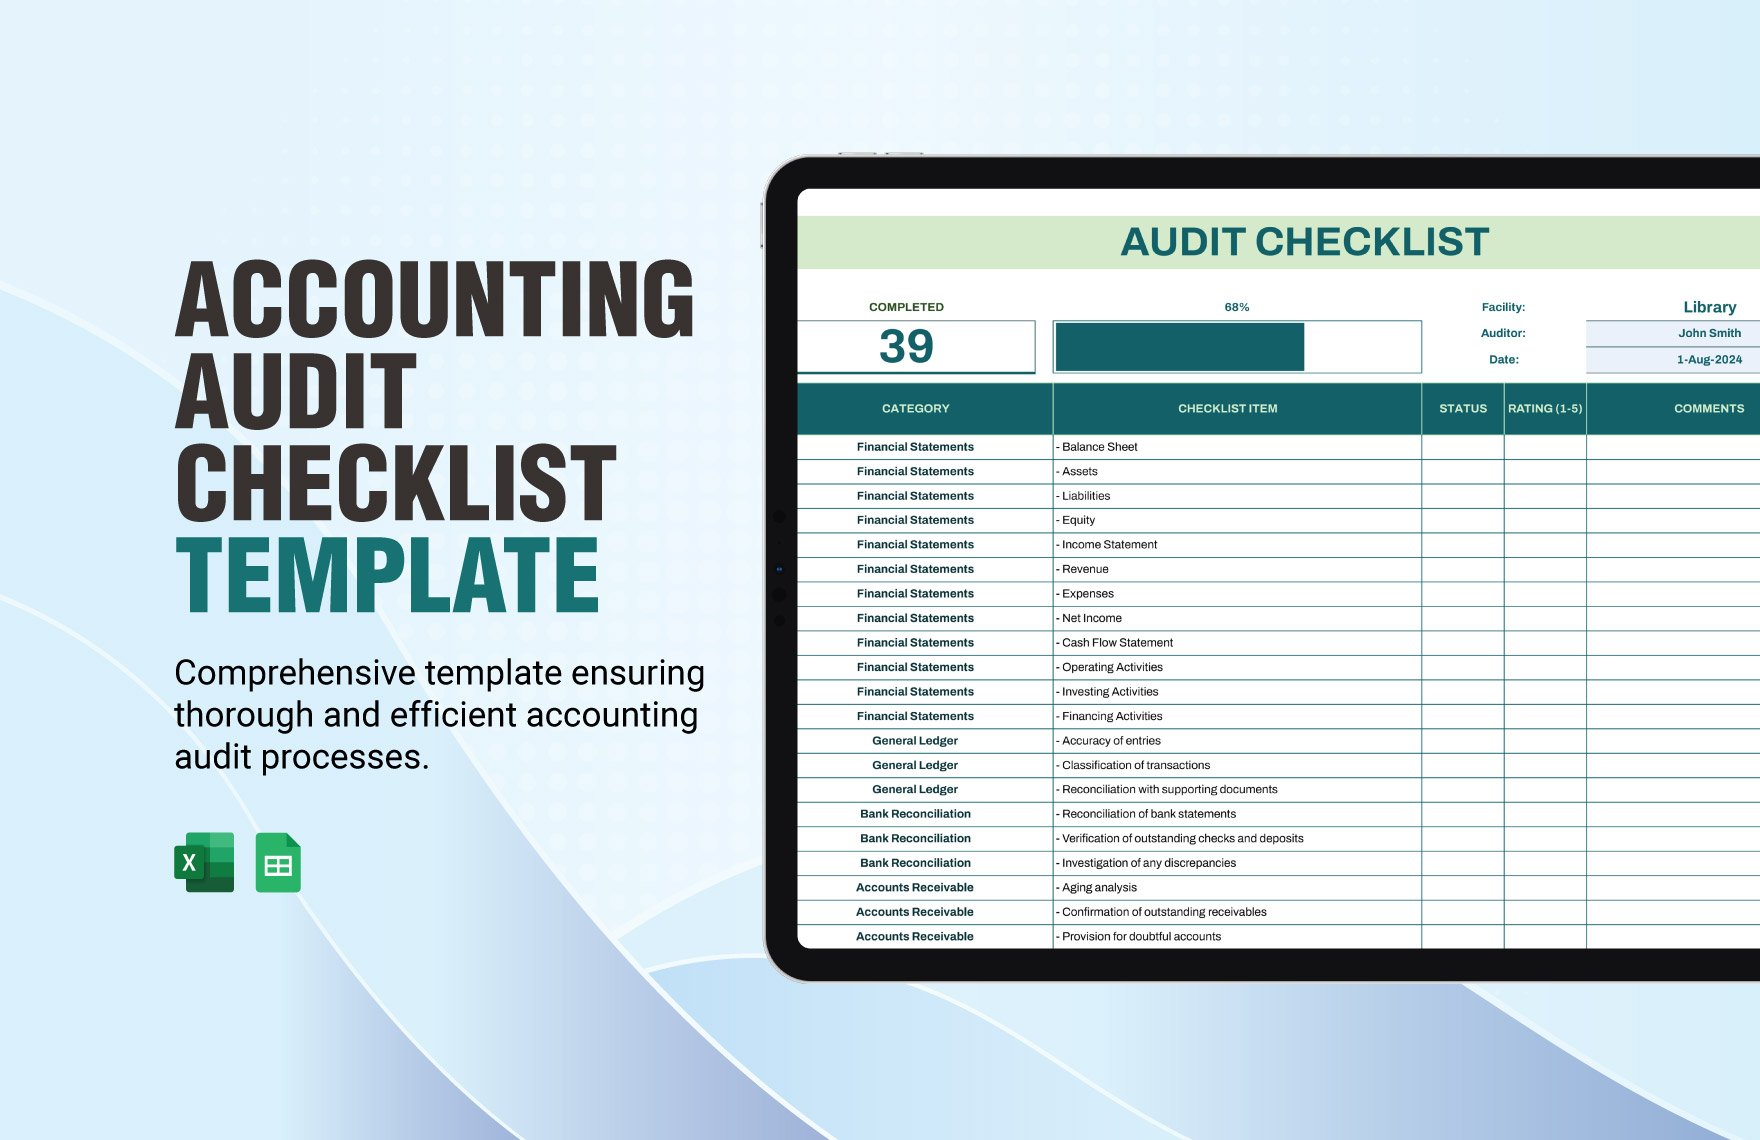 Accounting Audit Checklist Template in Excel, Google Sheets